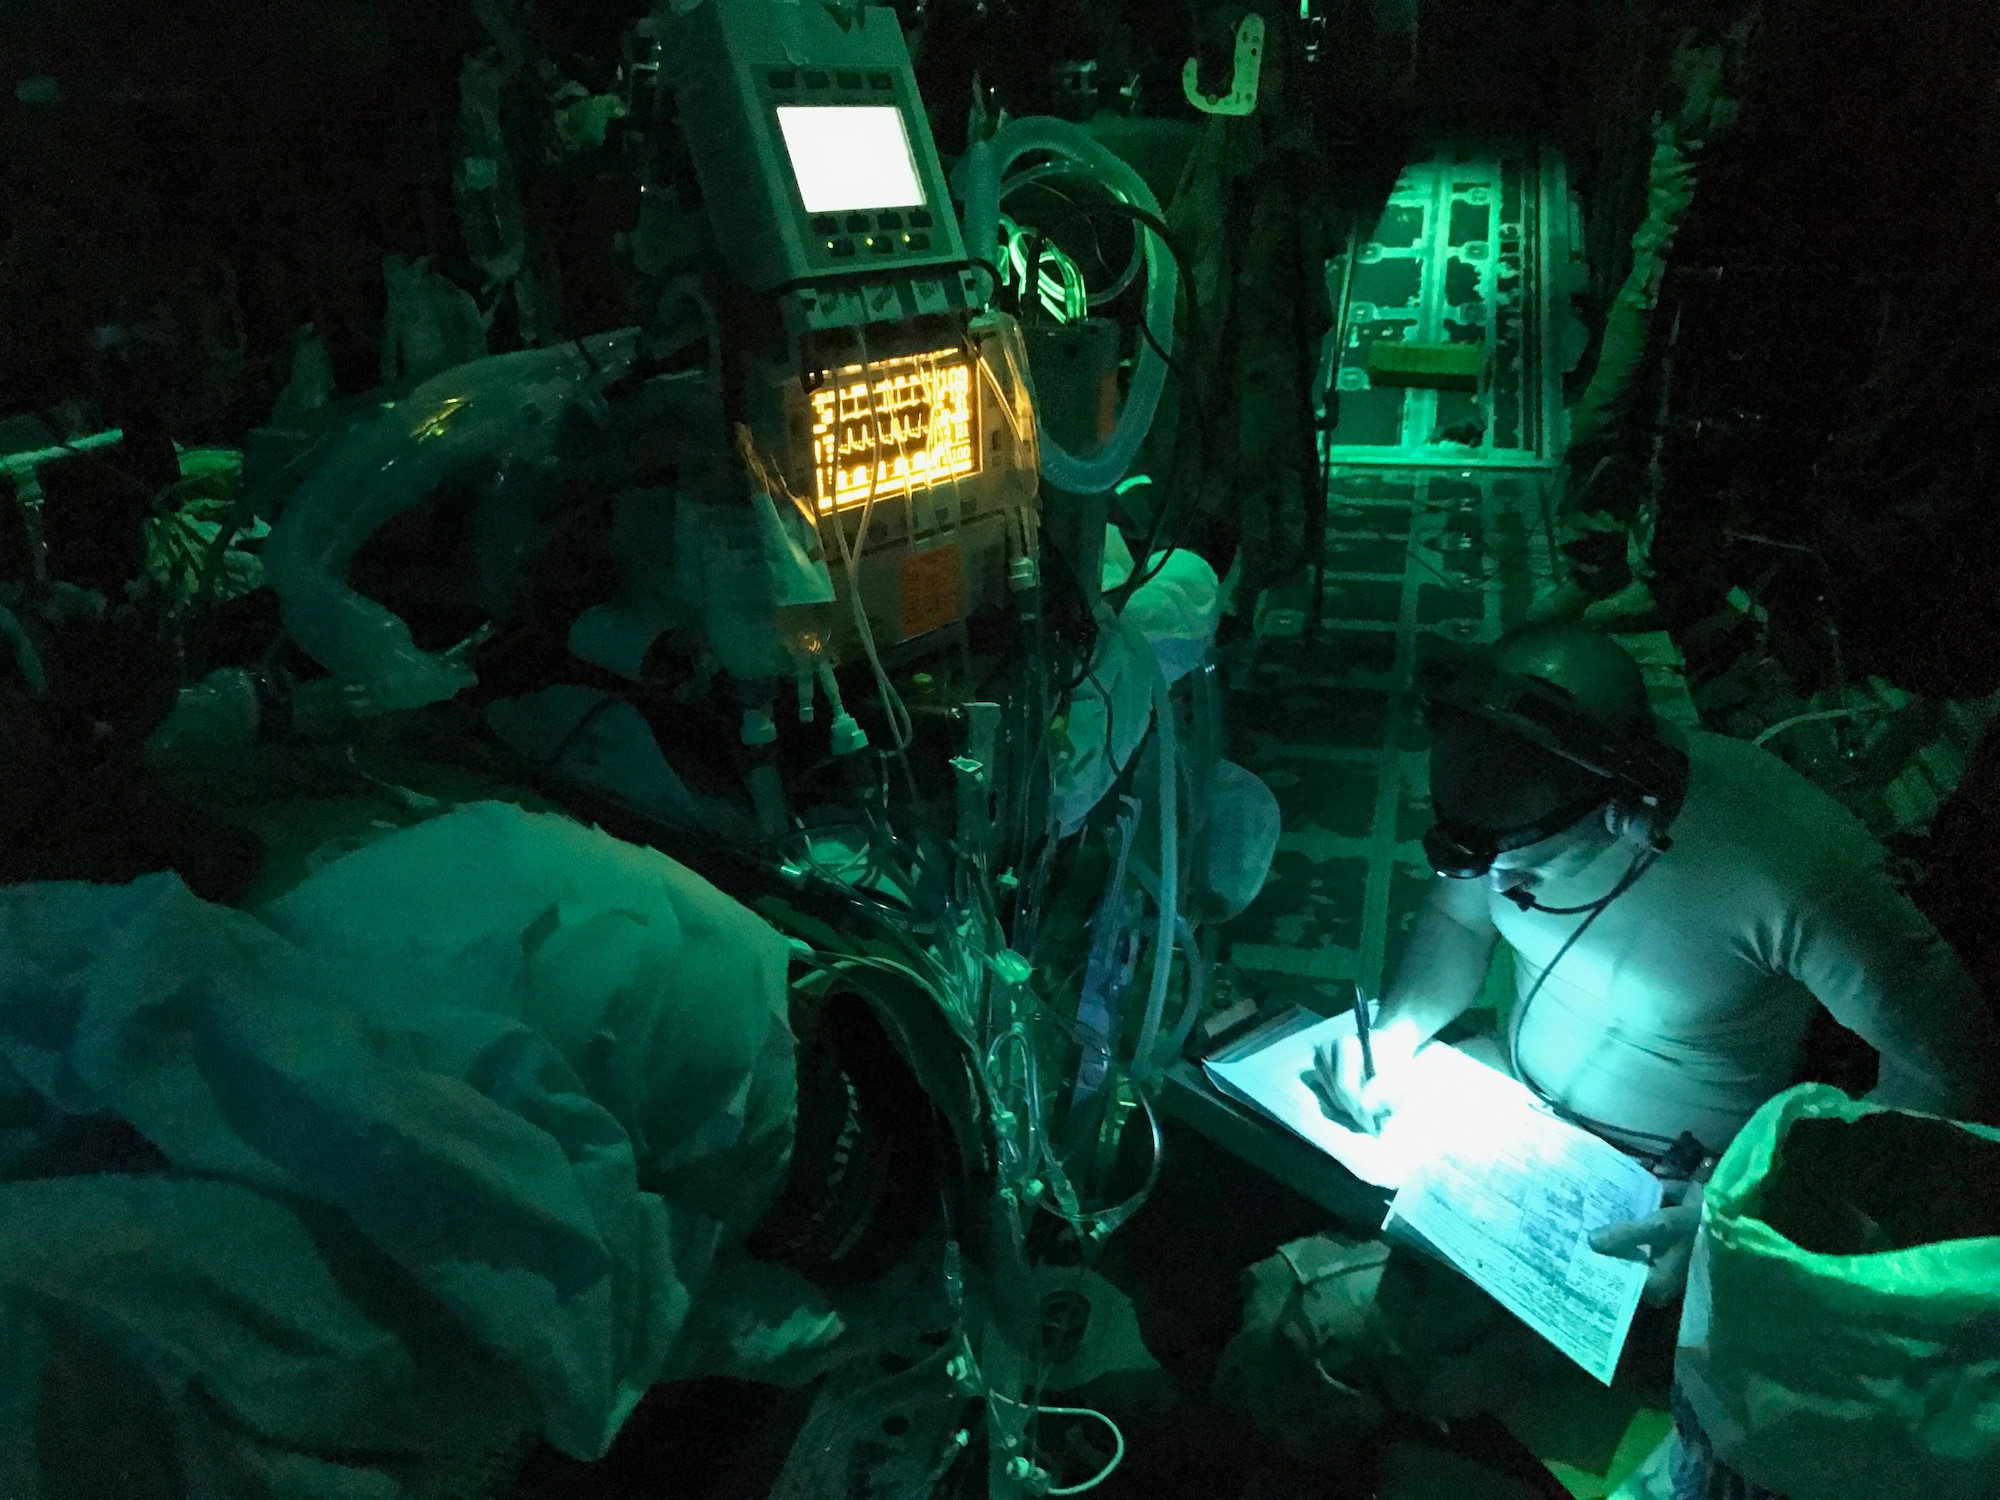 Members of the 455th Expeditionary Aeromedical Evacuation Squadron provide care for U.S. Army Soldiers who were wounded in a rocket propelled grenade attack in a C-130J Super Hercules during a flight to Bagram Airfield, Afghanistan June 17, 2017. The Soldiers underwent 12 hours of trauma care at Craig Joint Theater Hospital at Bagram before they were flown to Germany by a C-17 Globemaster III from Travis Air Force Base, Calif. (Courtesy Photo)